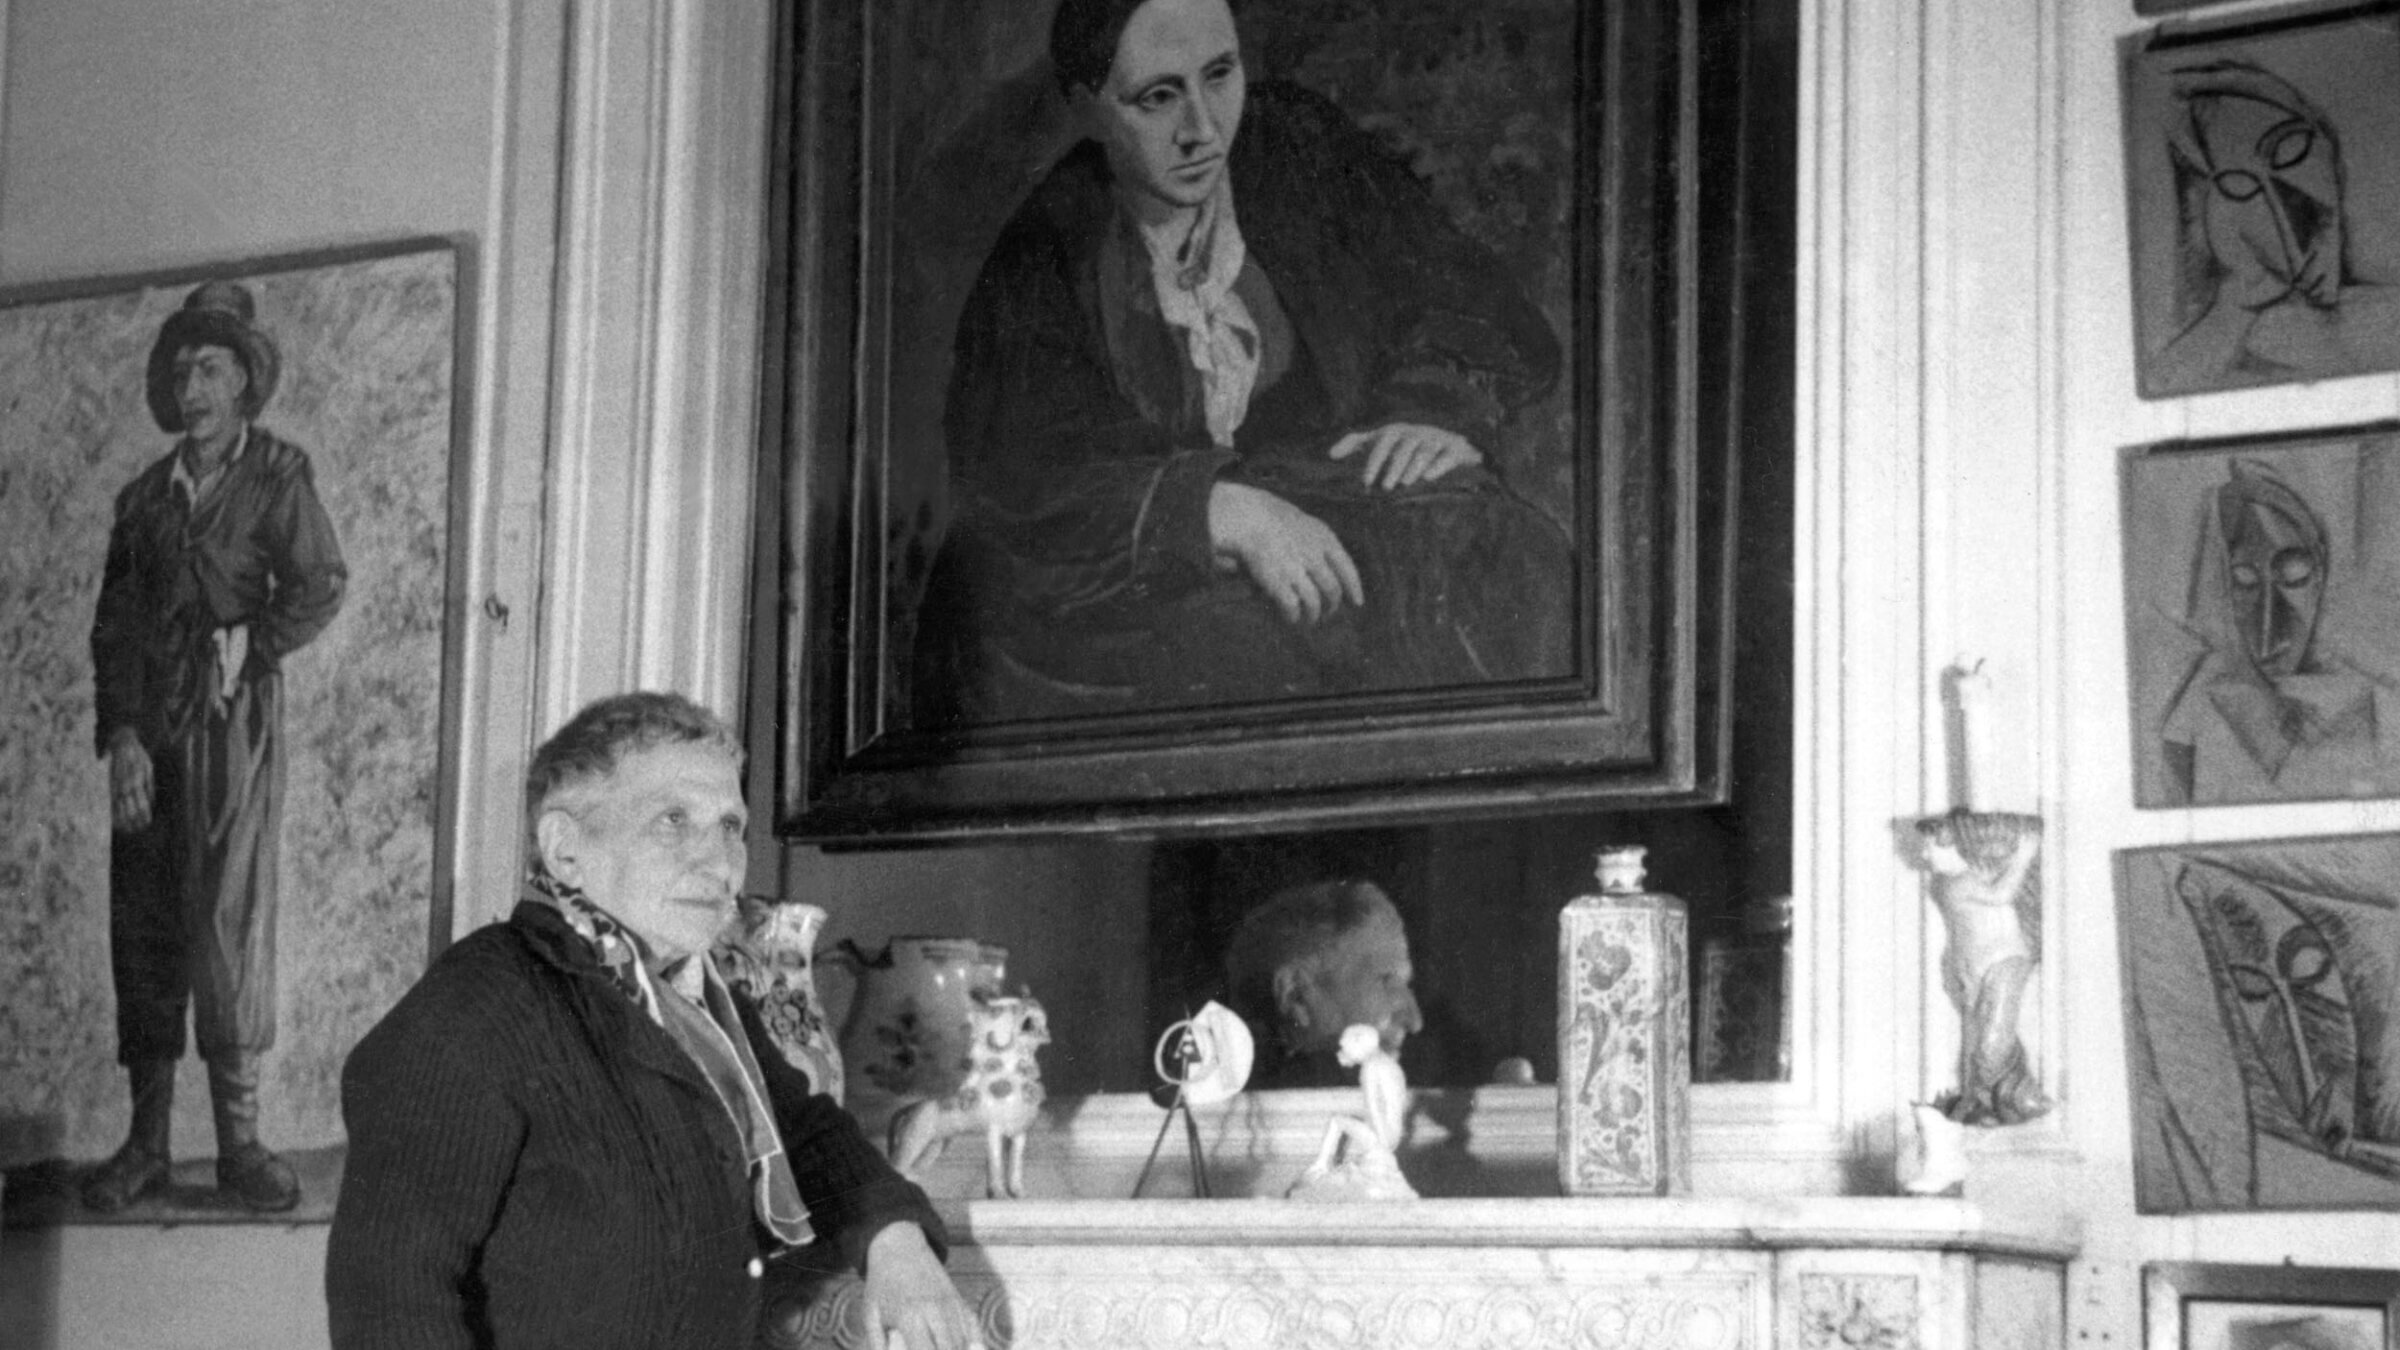 Gertrude Stein poses in front of the portrait of her that Picasso painted in 1906.